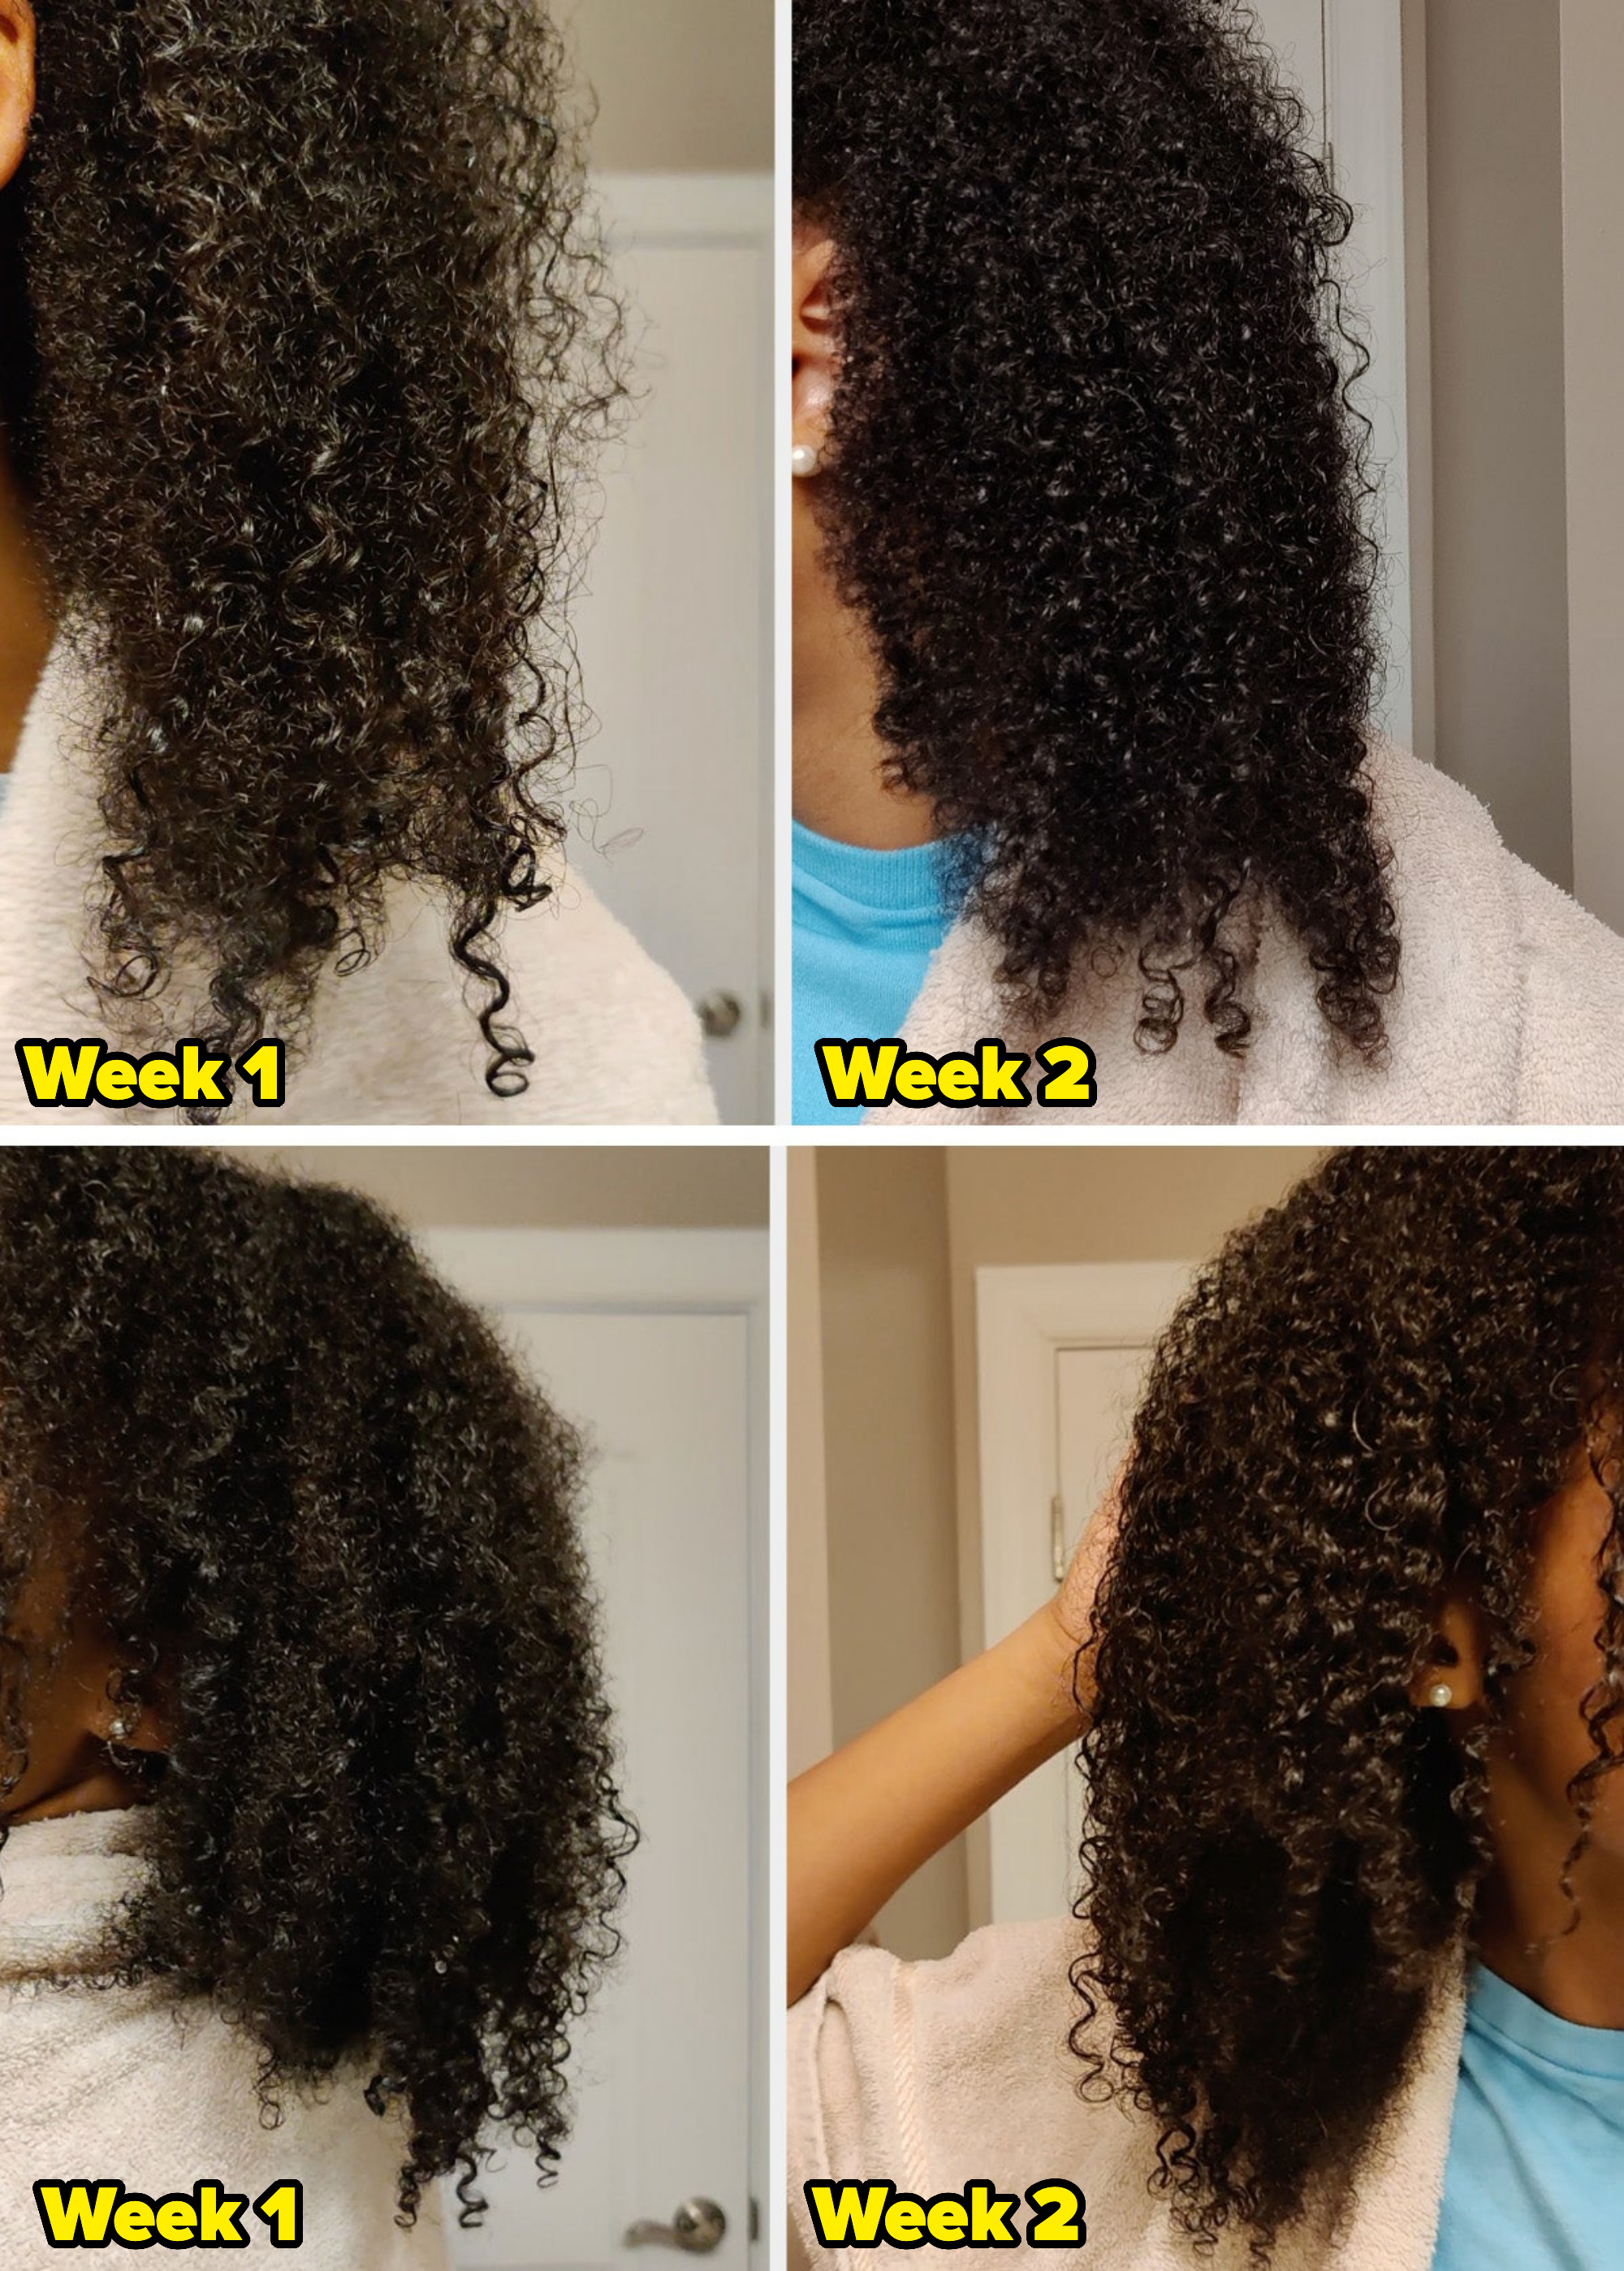 A before and after: Curls that have some frizz Week 1 then curls that have more definition Week 2